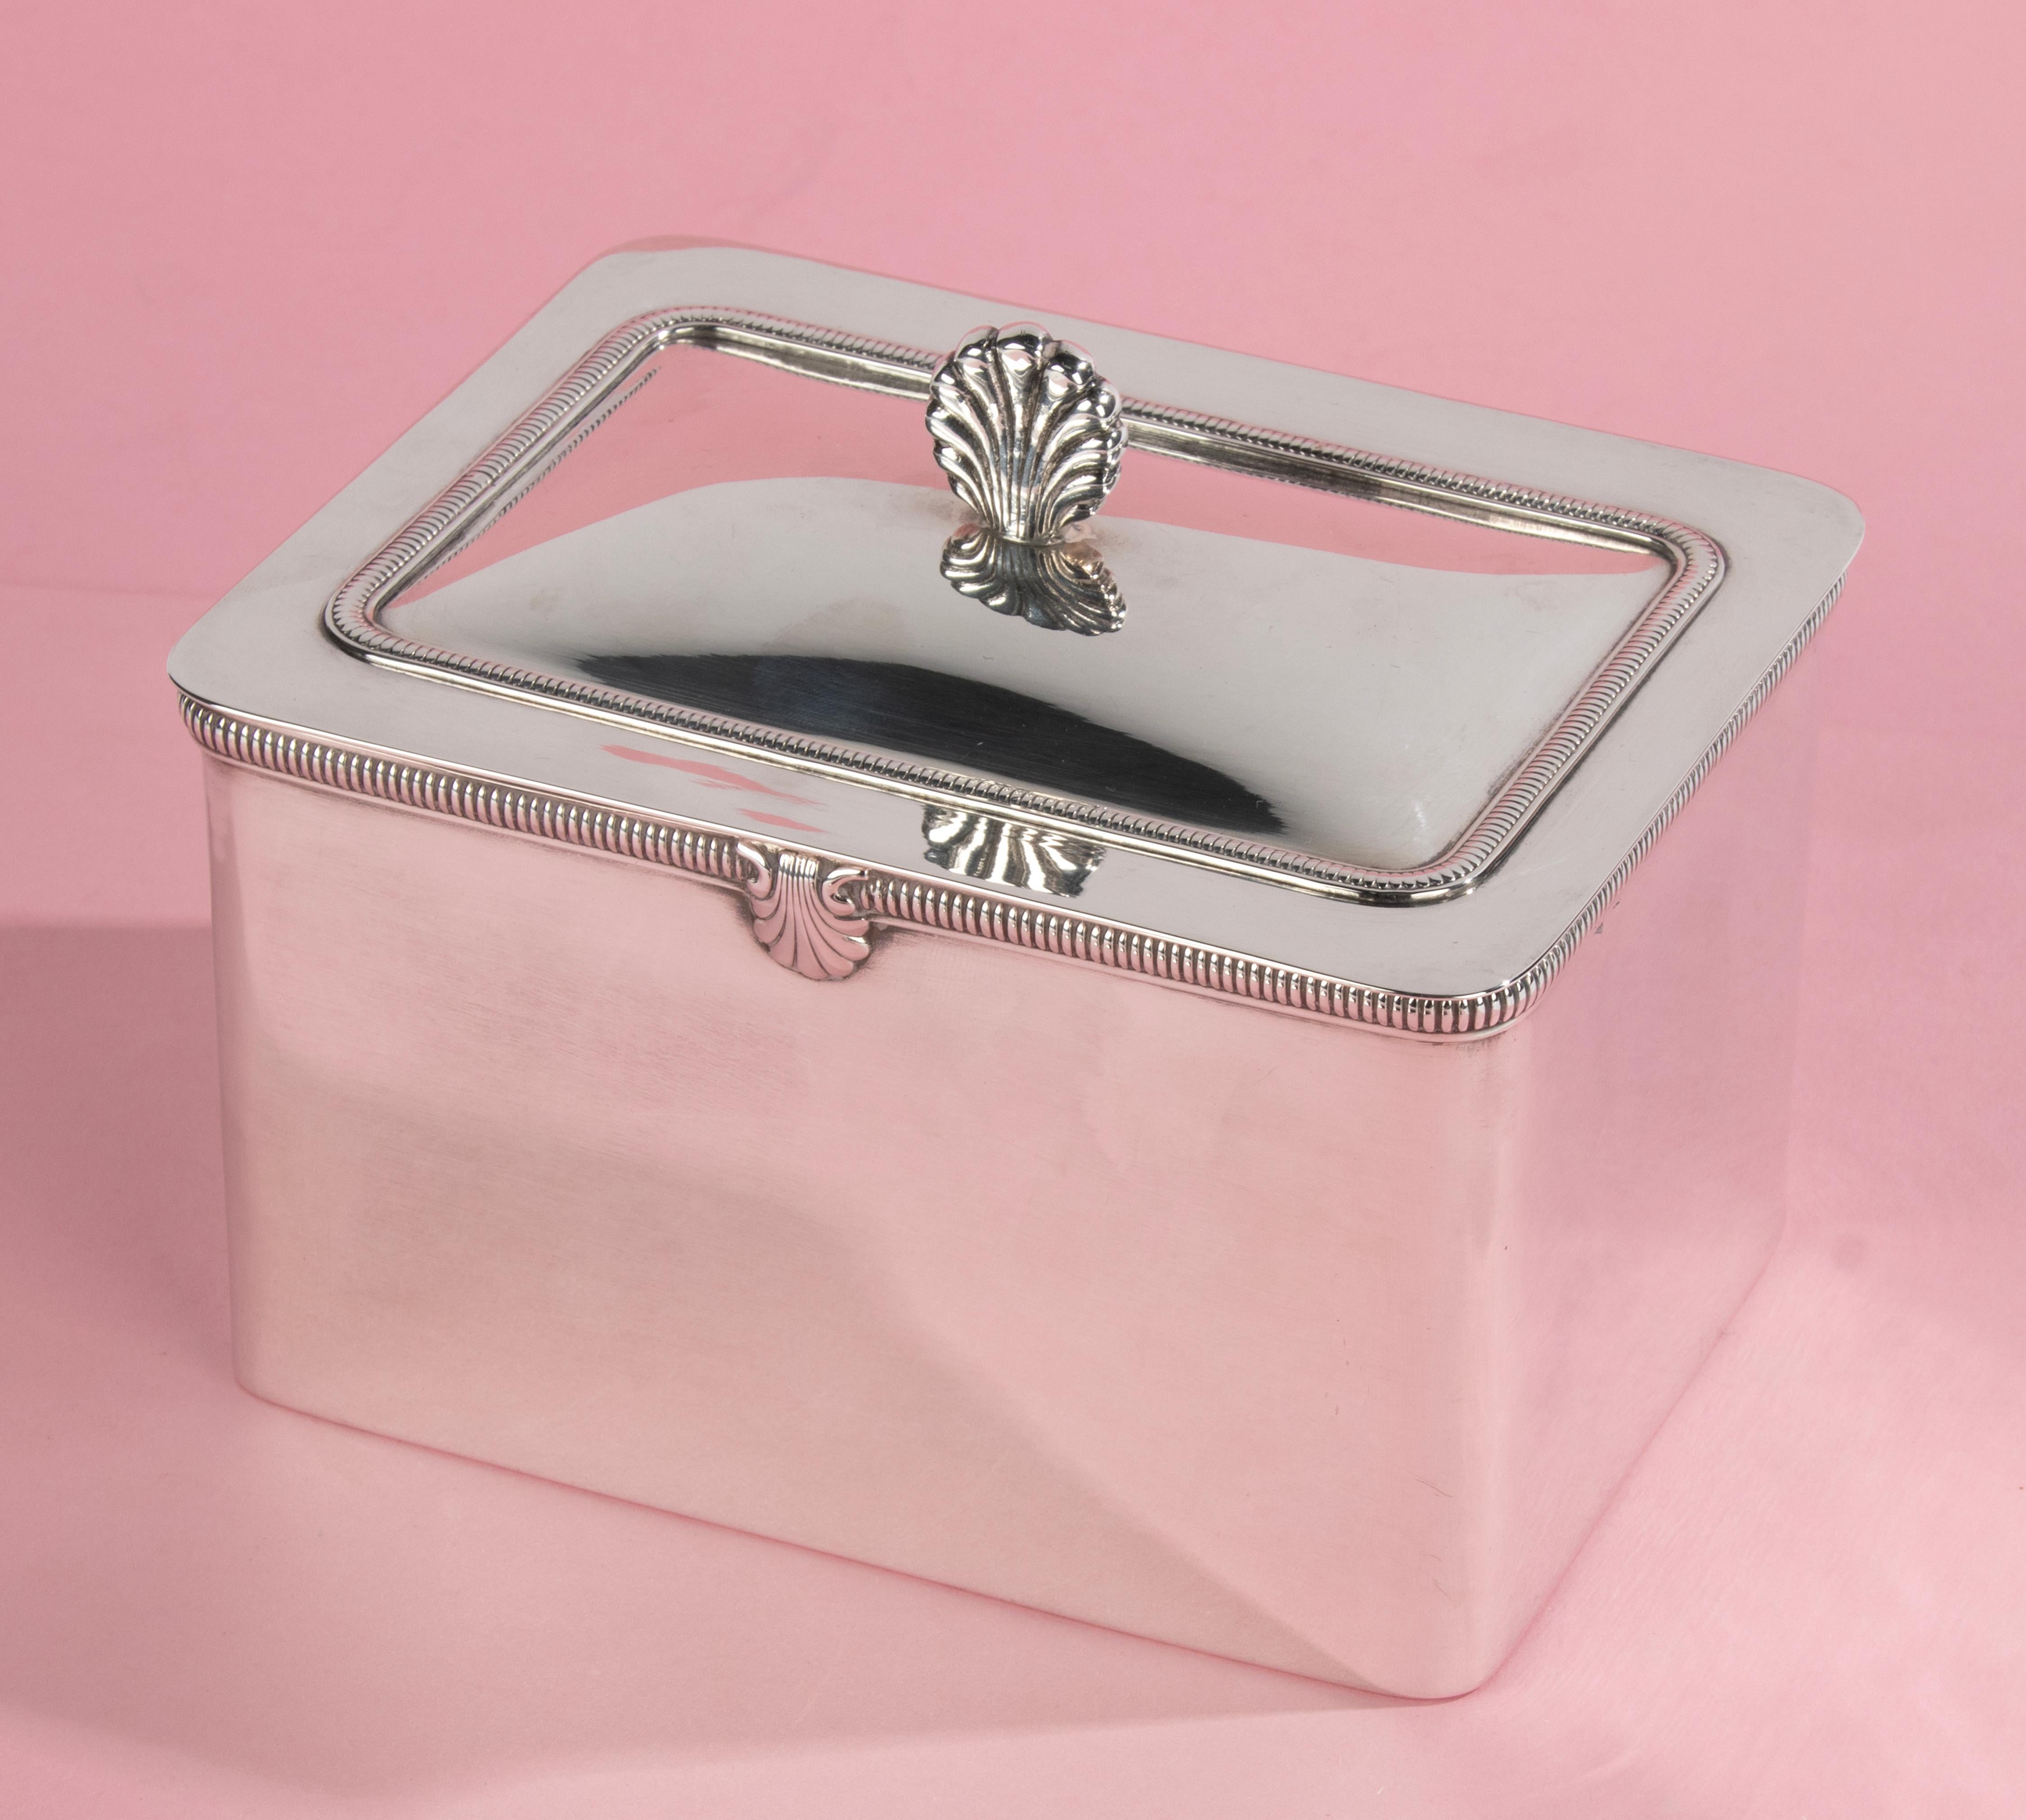 Elegant Mid 20th Century Silver Plated Biscuit Barrel on Tray  For Sale 4